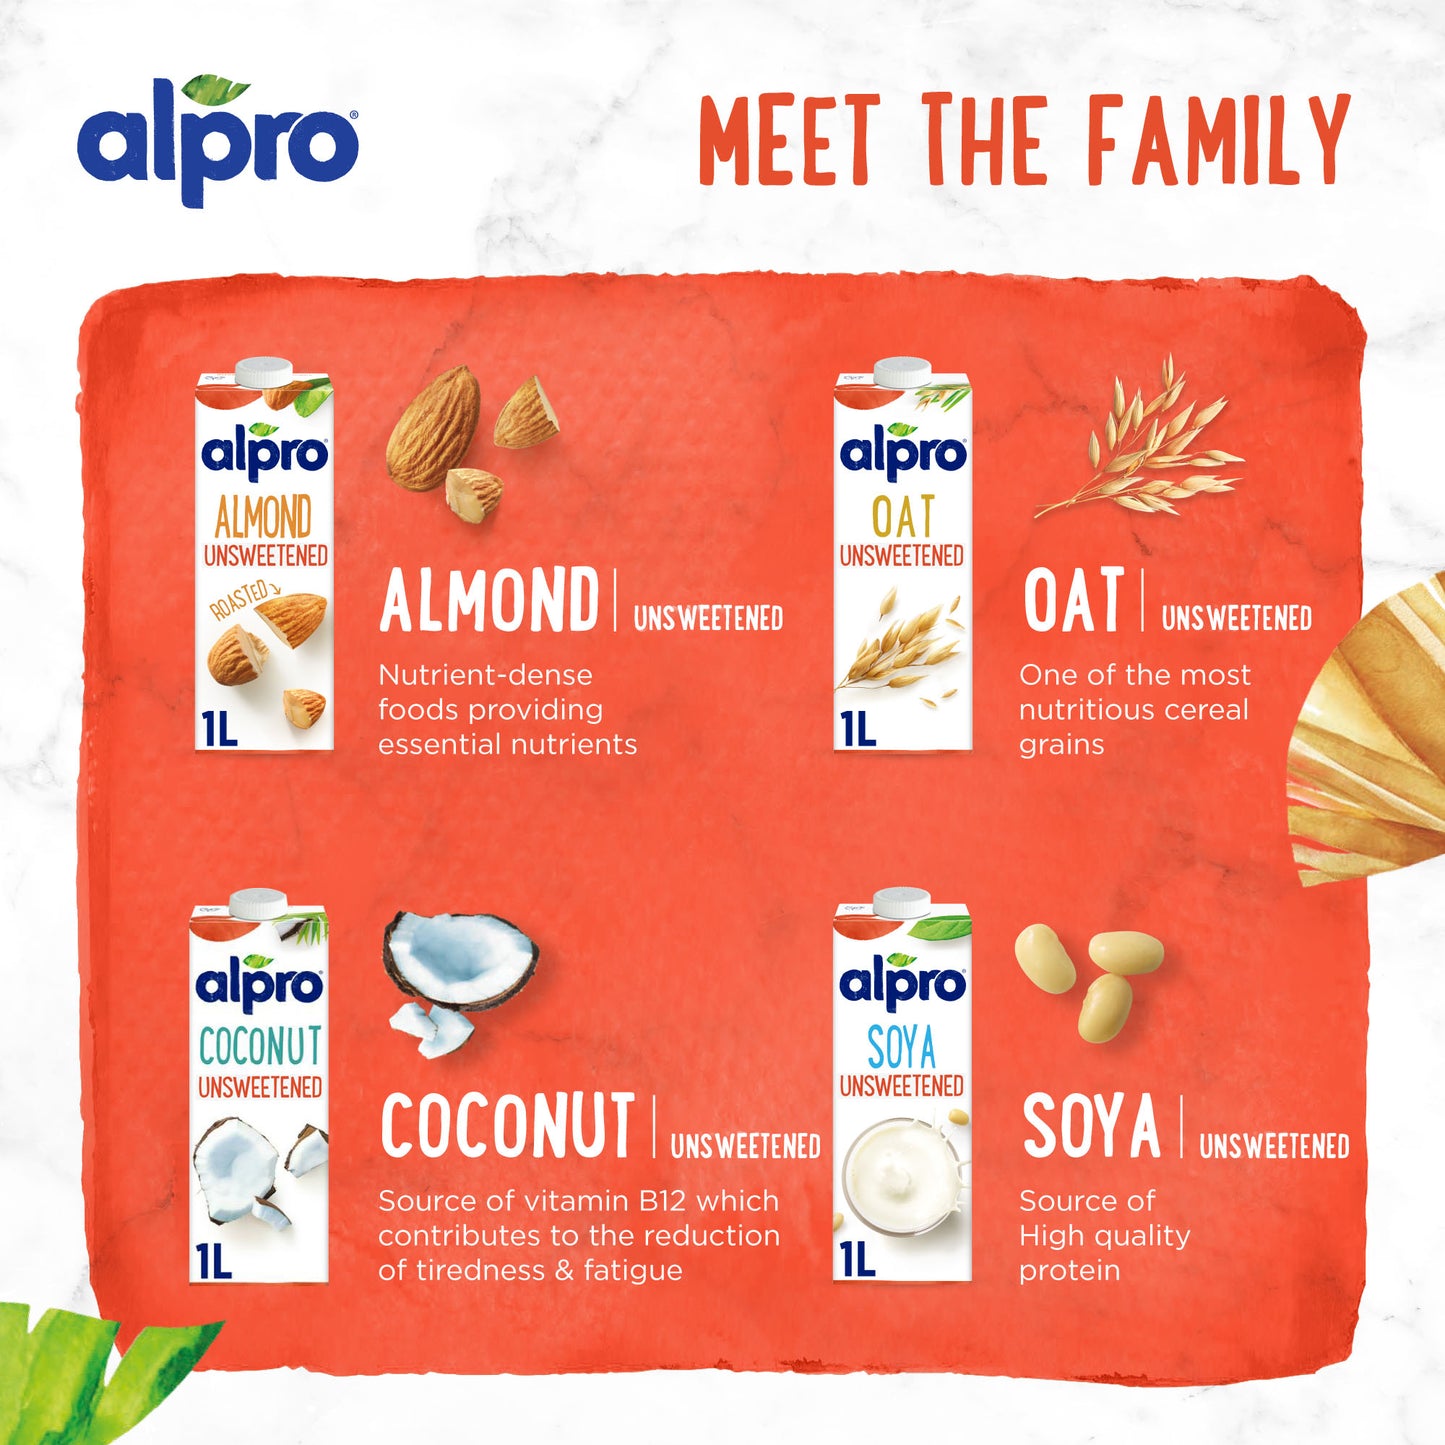 Alpro Almond Unsweetened Drink, 1L, 100% Plant Based And Dairy Free, Suitable For Vegans, Naturally Free From Lactose, Rich In Nutrients